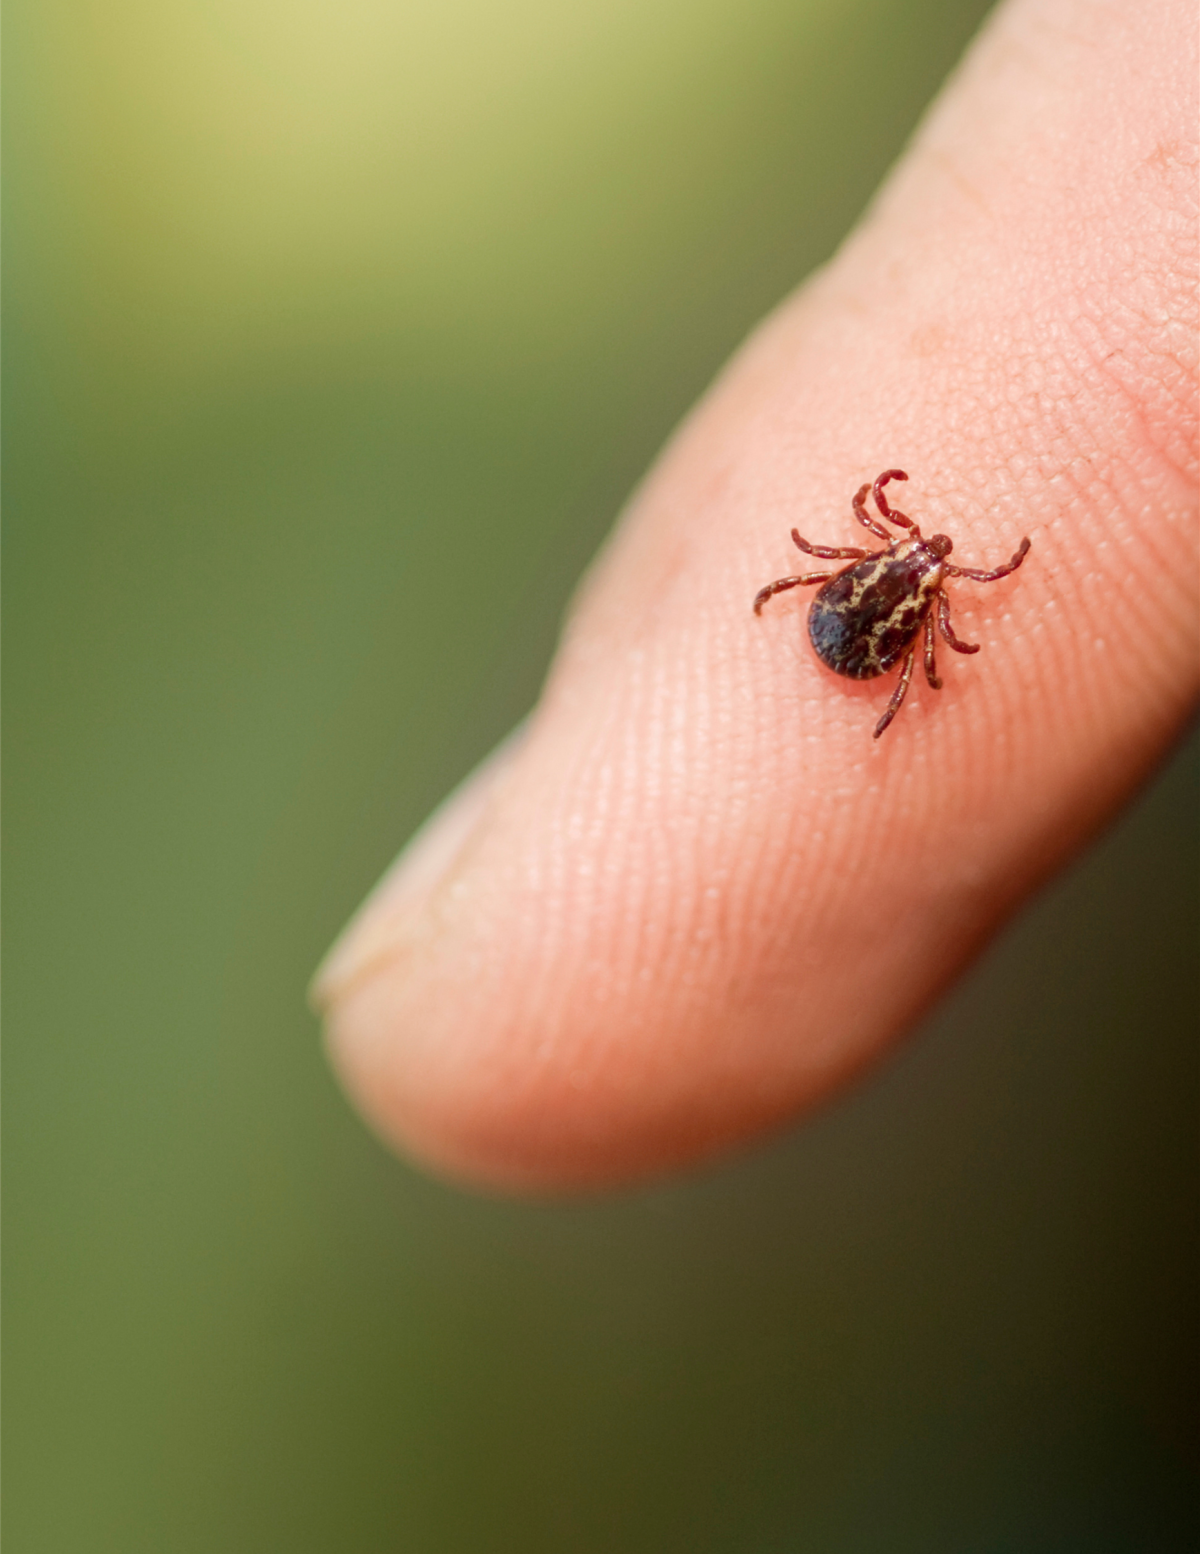 Tick on a person's Finger.